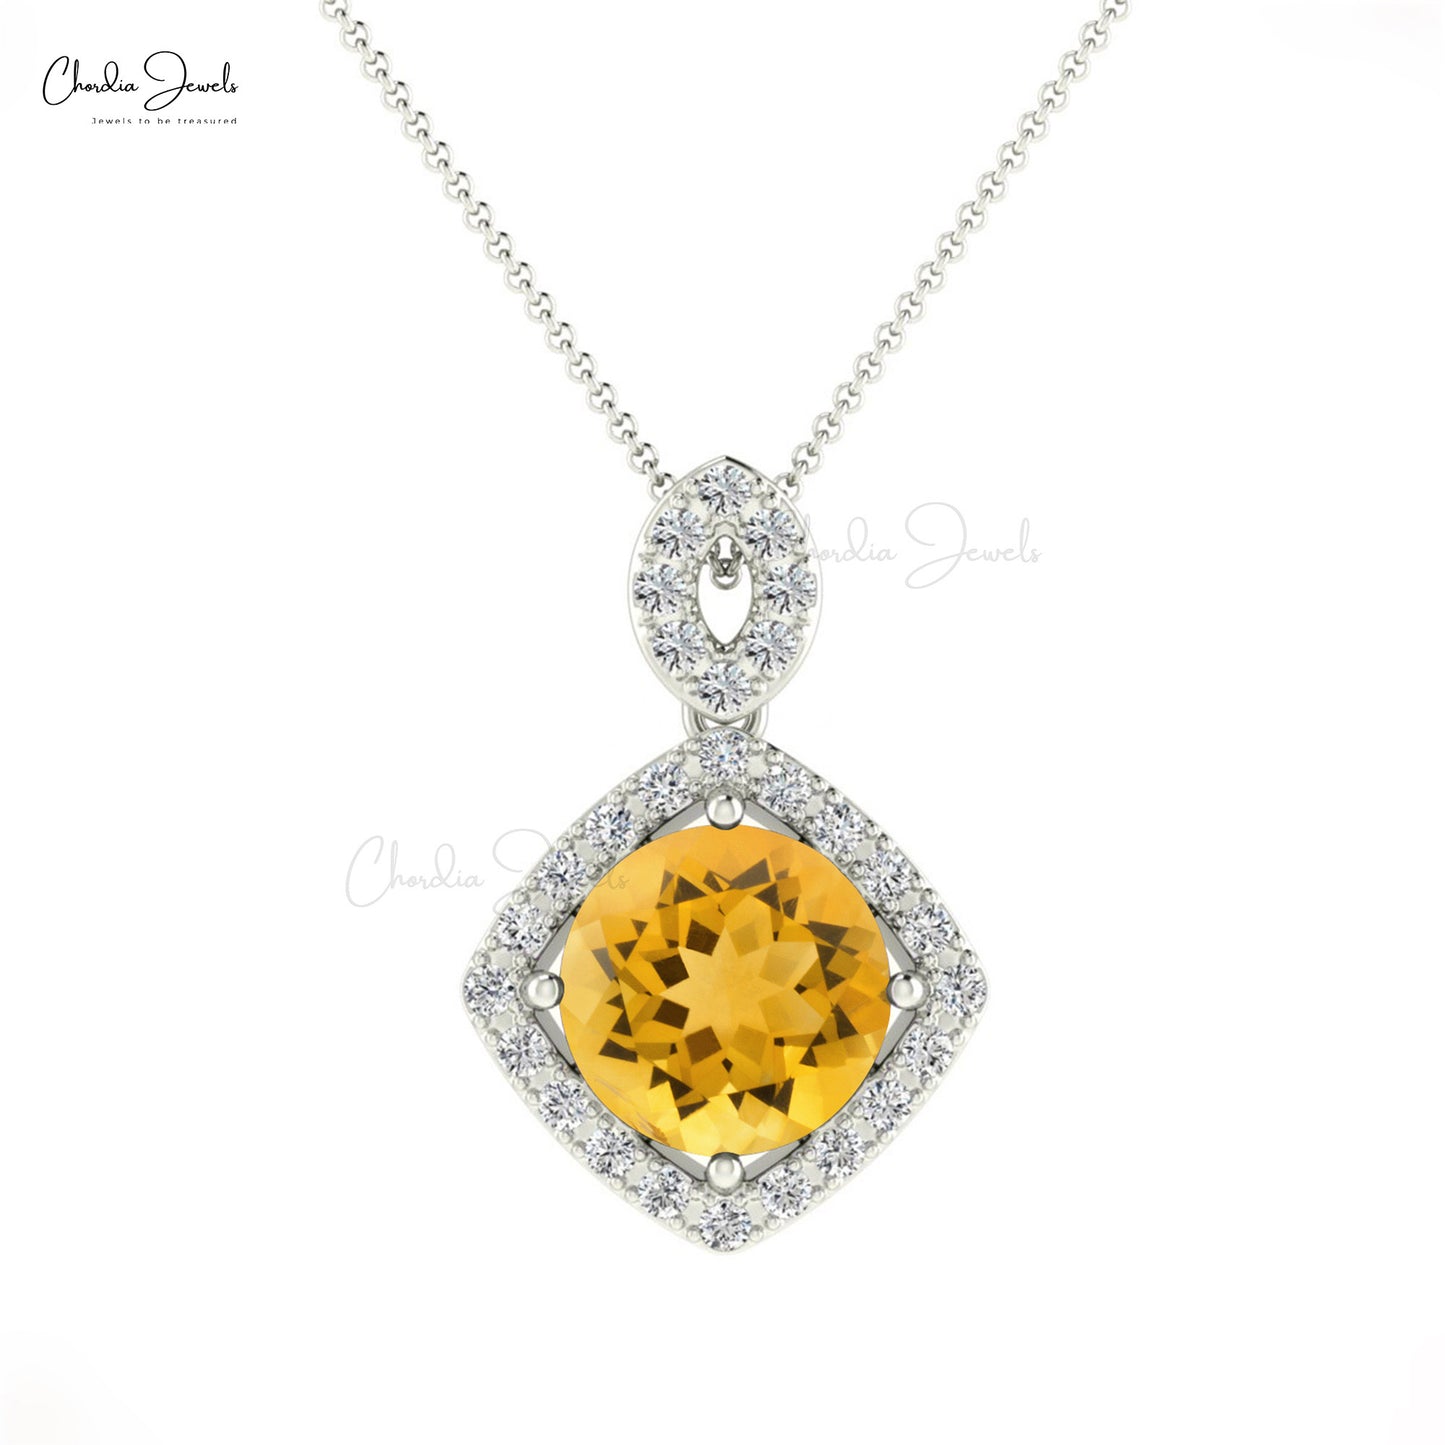 Buy Blue Yellow Sapphire Necklace Pendant in 14k Real Gold | Chordia Jewels